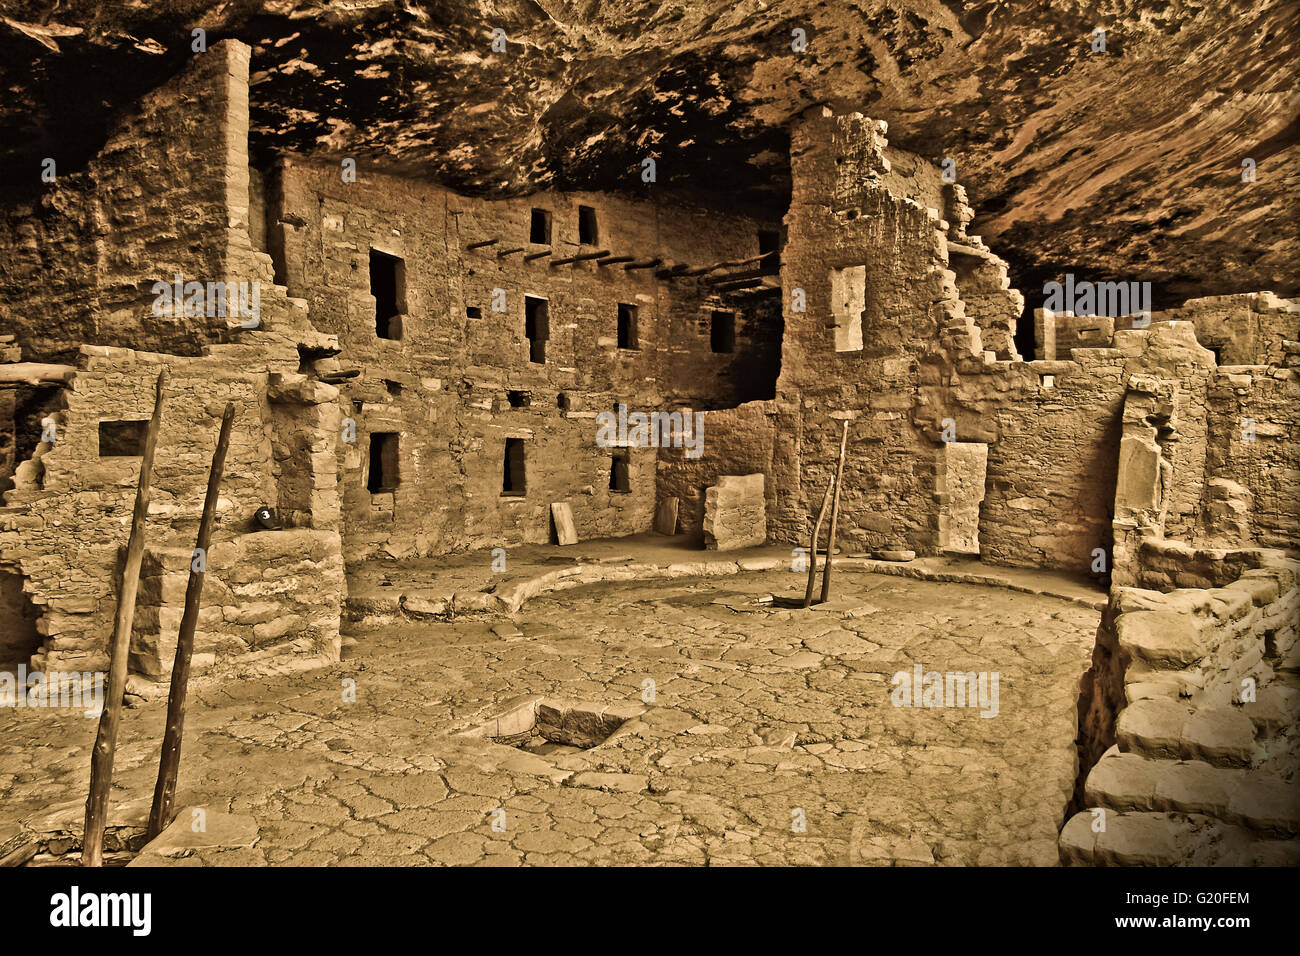 Cliff Dwellings of Mesa  Verde National Park preserves, spectacular reminder of this ancient culture. Stock Photo